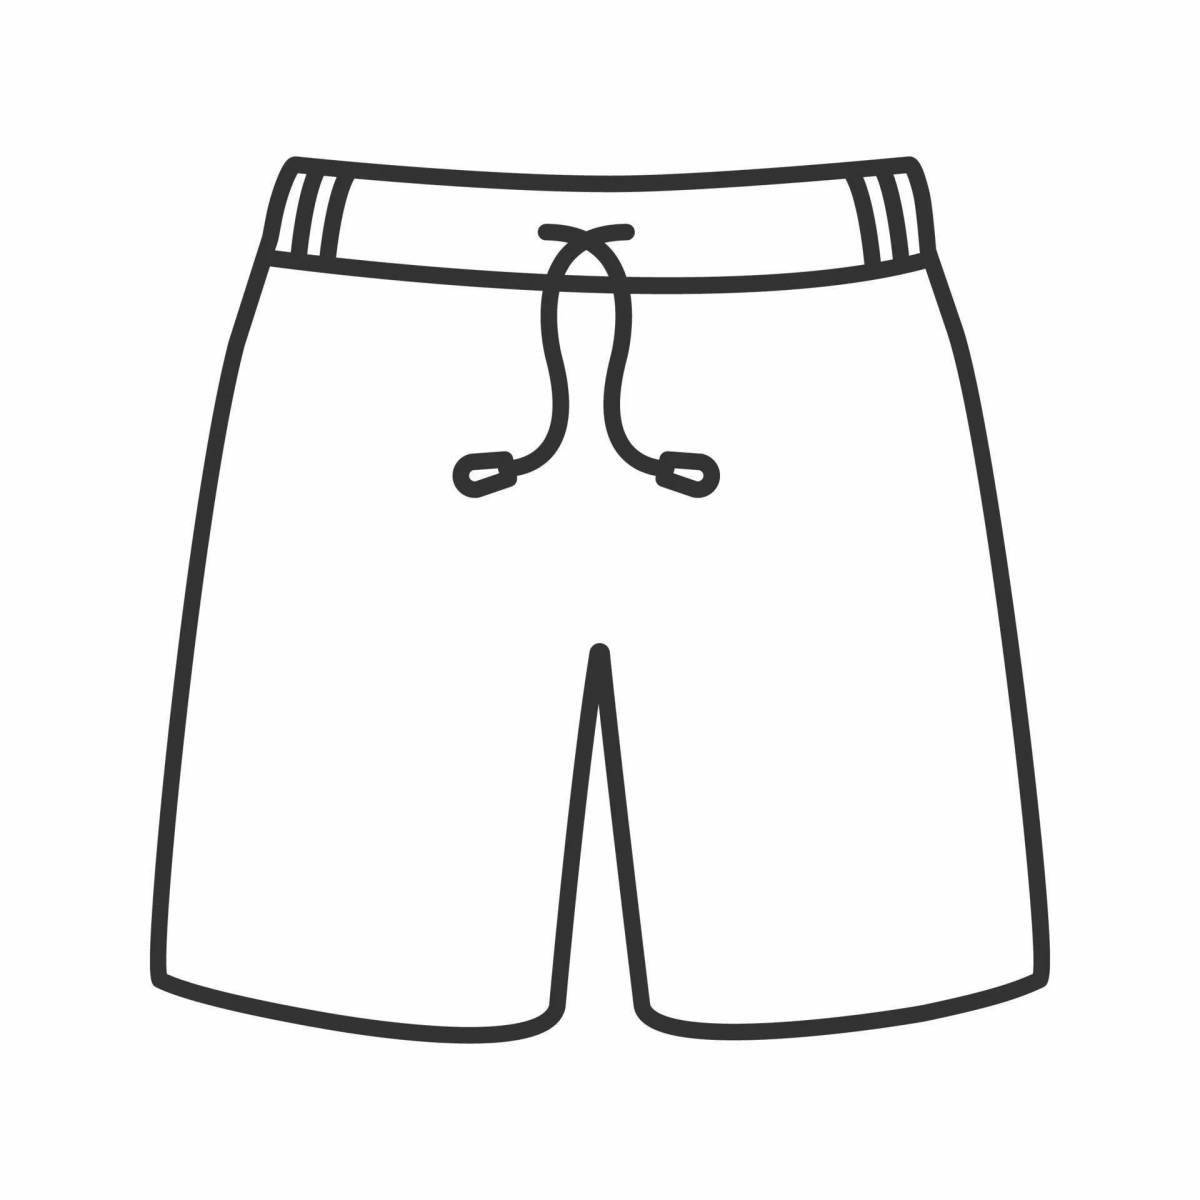 Fine shorts coloring page for toddlers